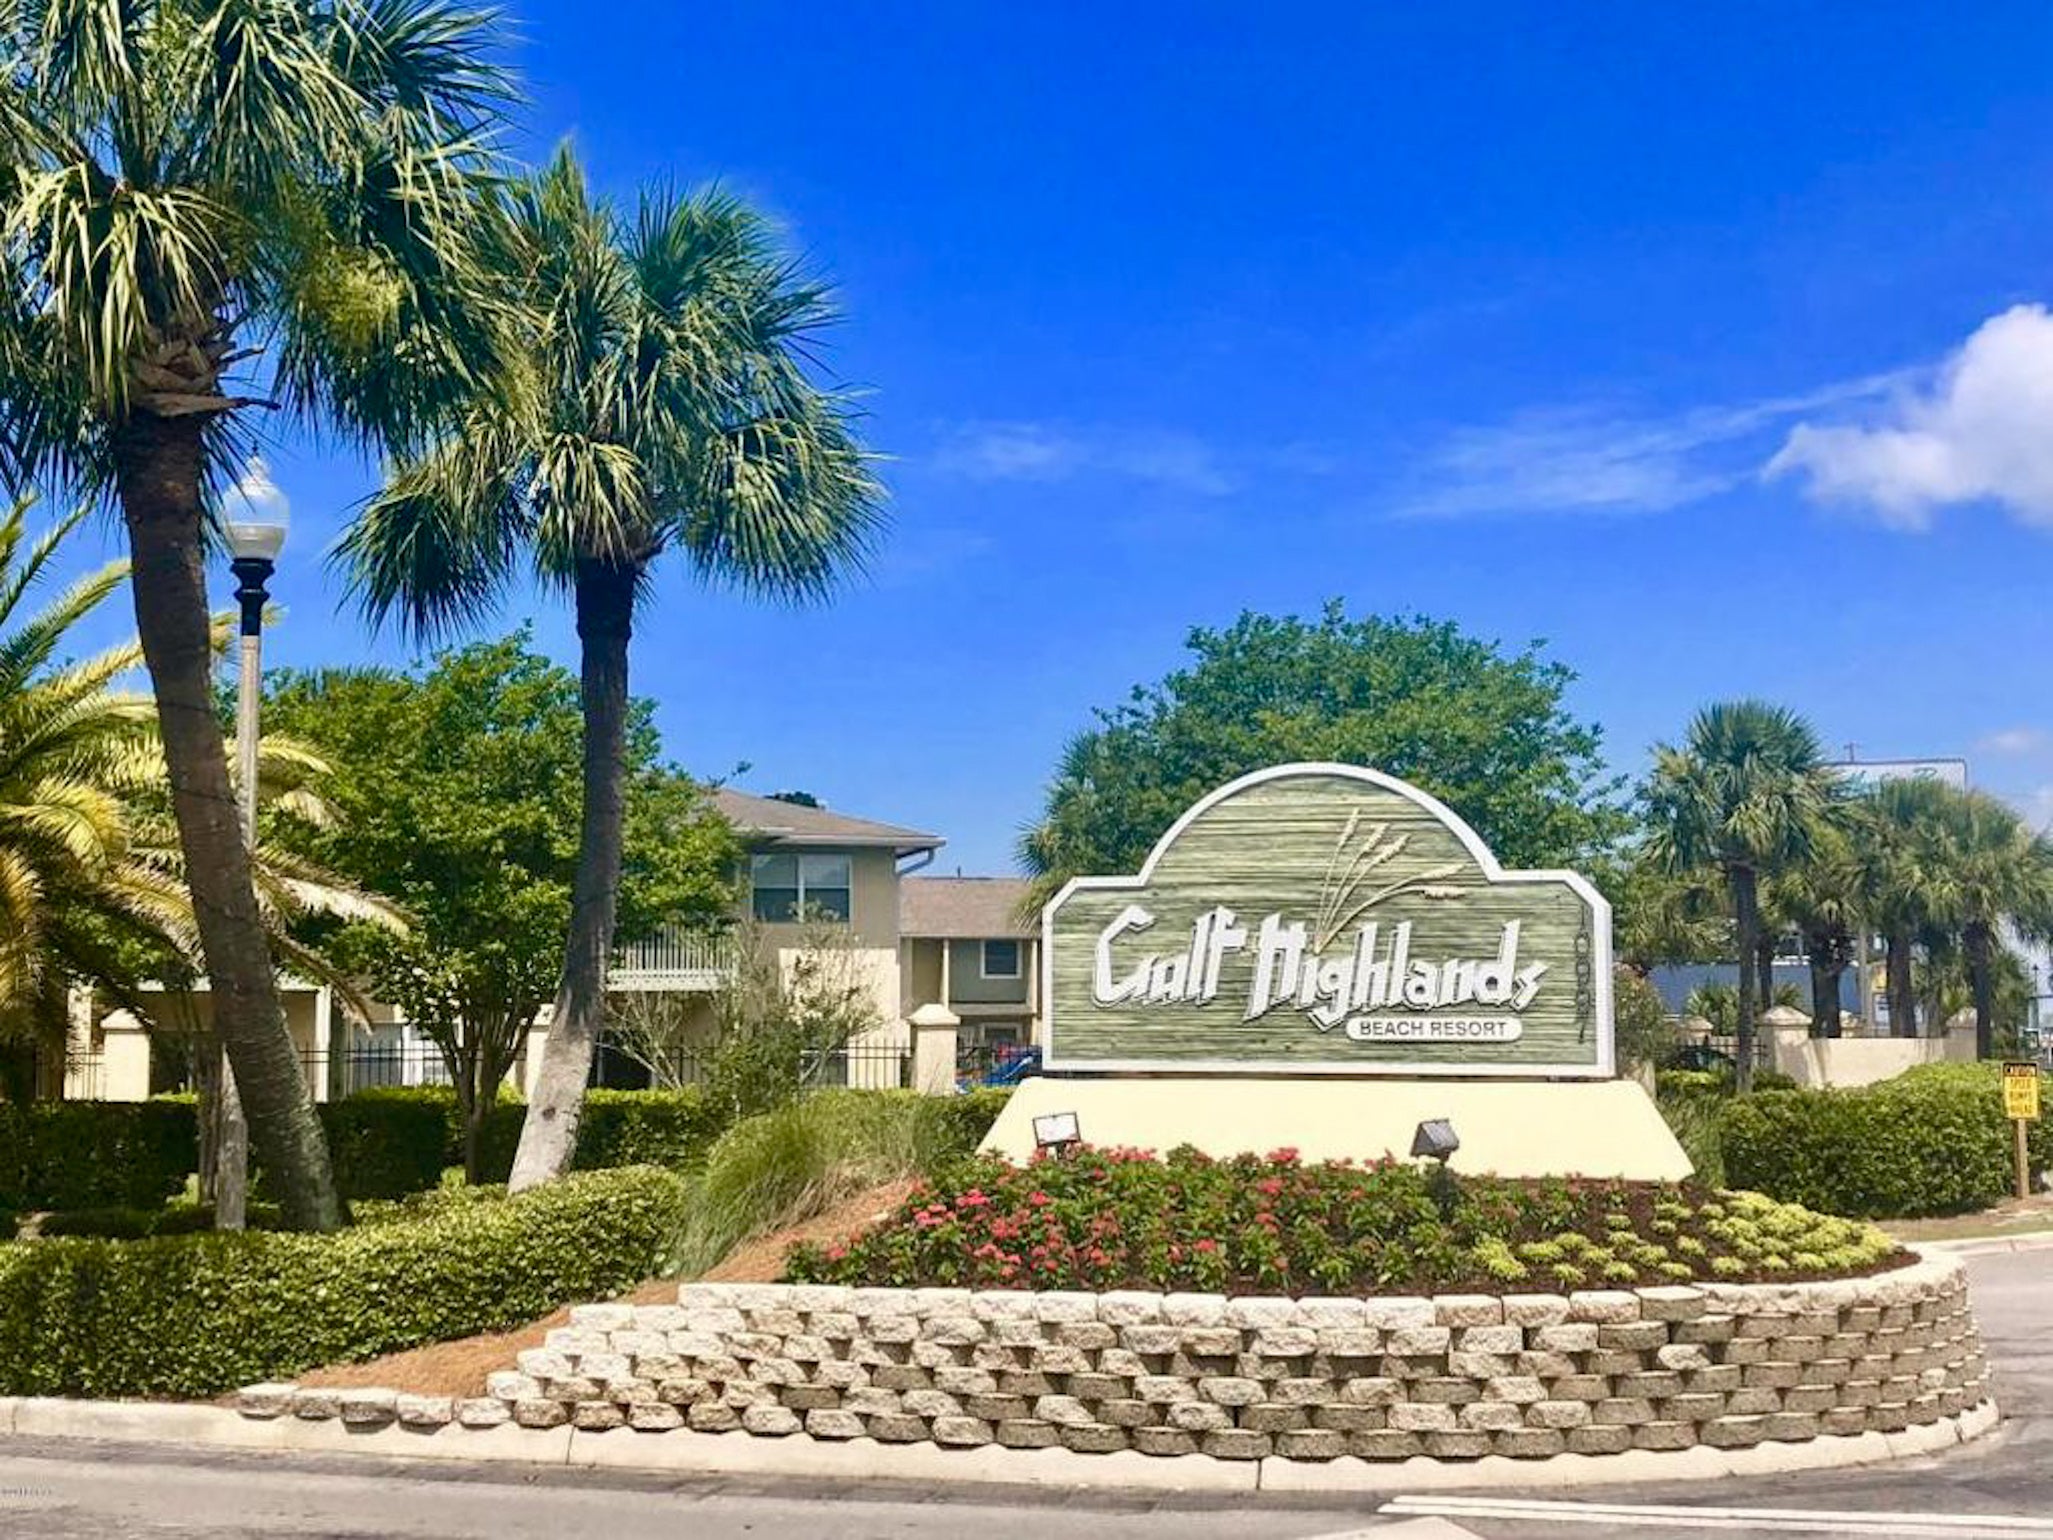 Welcome to Gulf Highlands!